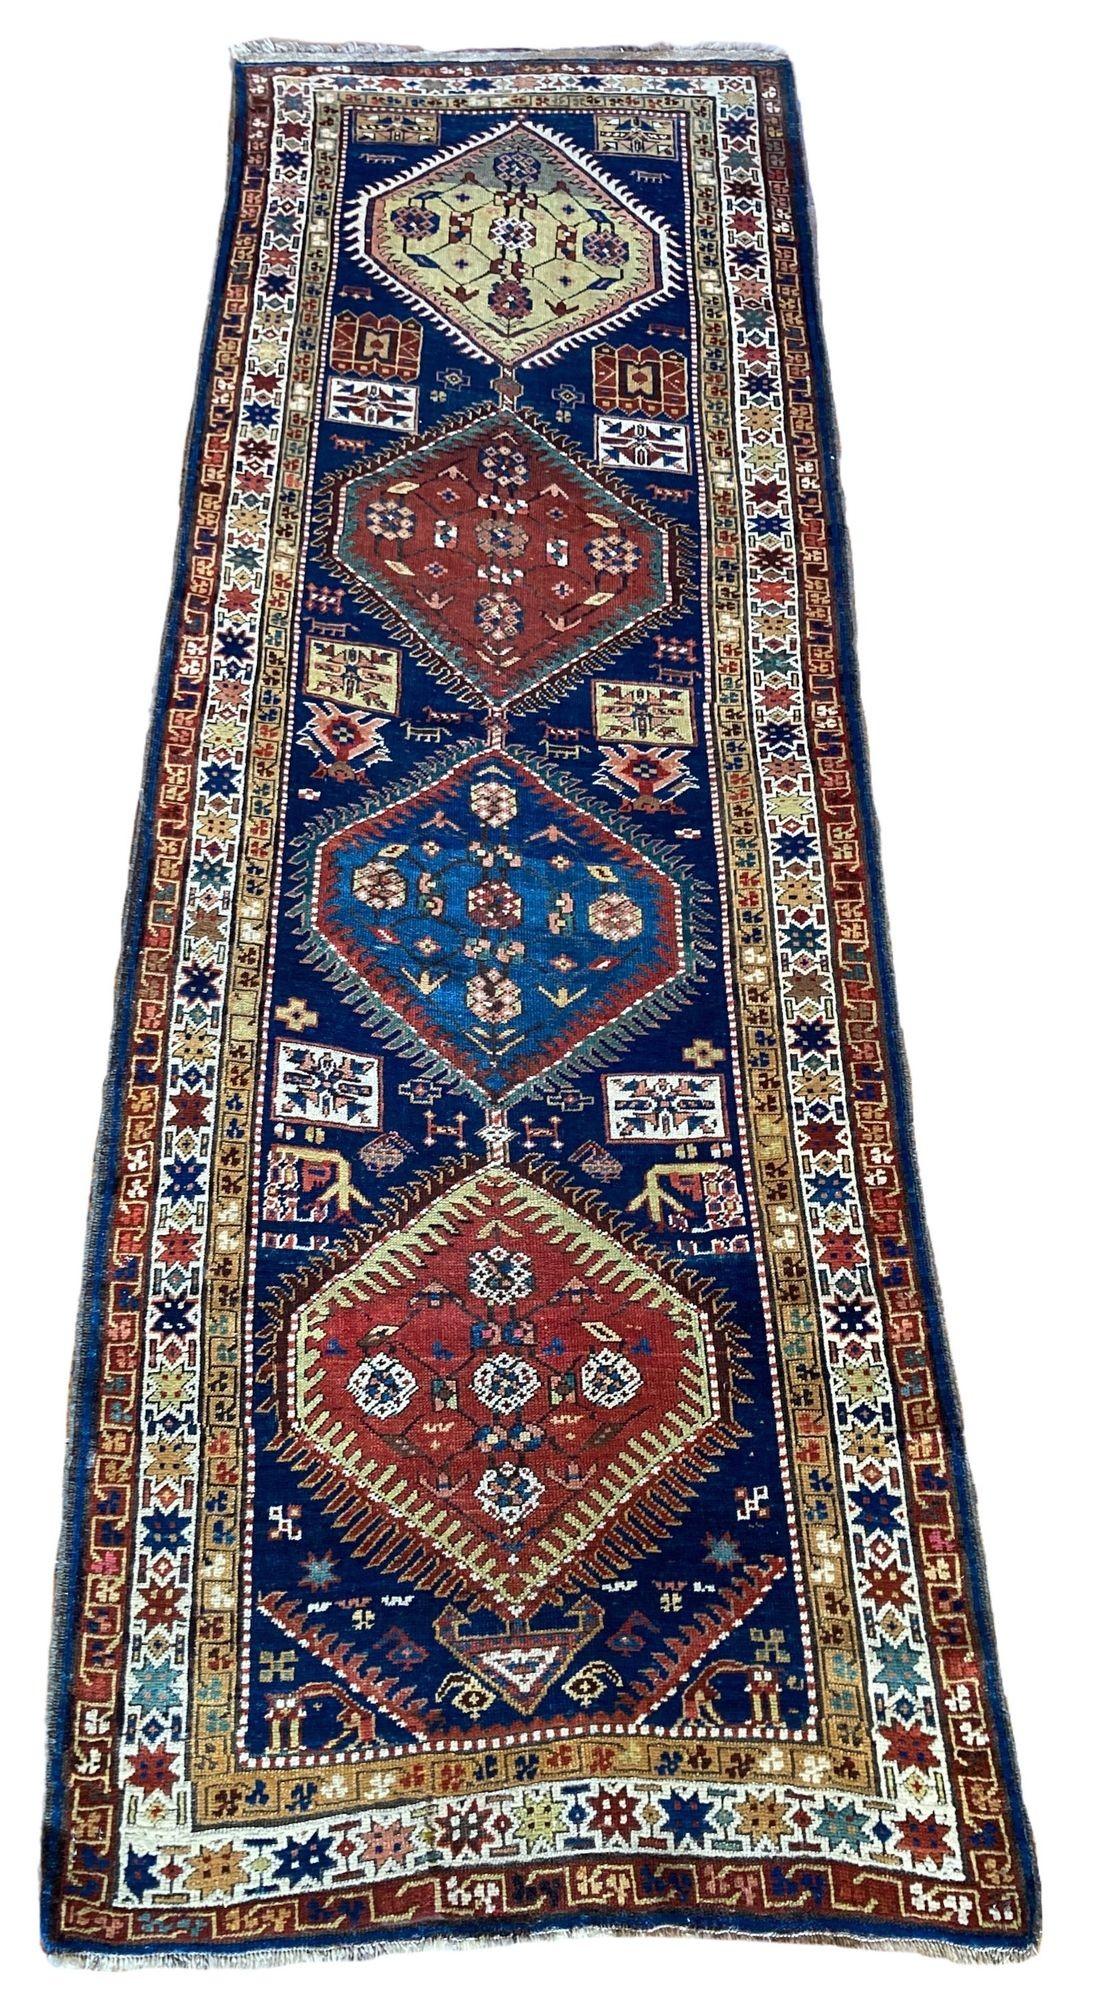 A fabulous antique runner, handwoven in the Caucasus mountains of southern Azerbaijan circa 1900. The design features 4 medallions on a navy blue field and ivory border. Lots of lovely secondary colours and a couple of animals if you can spot